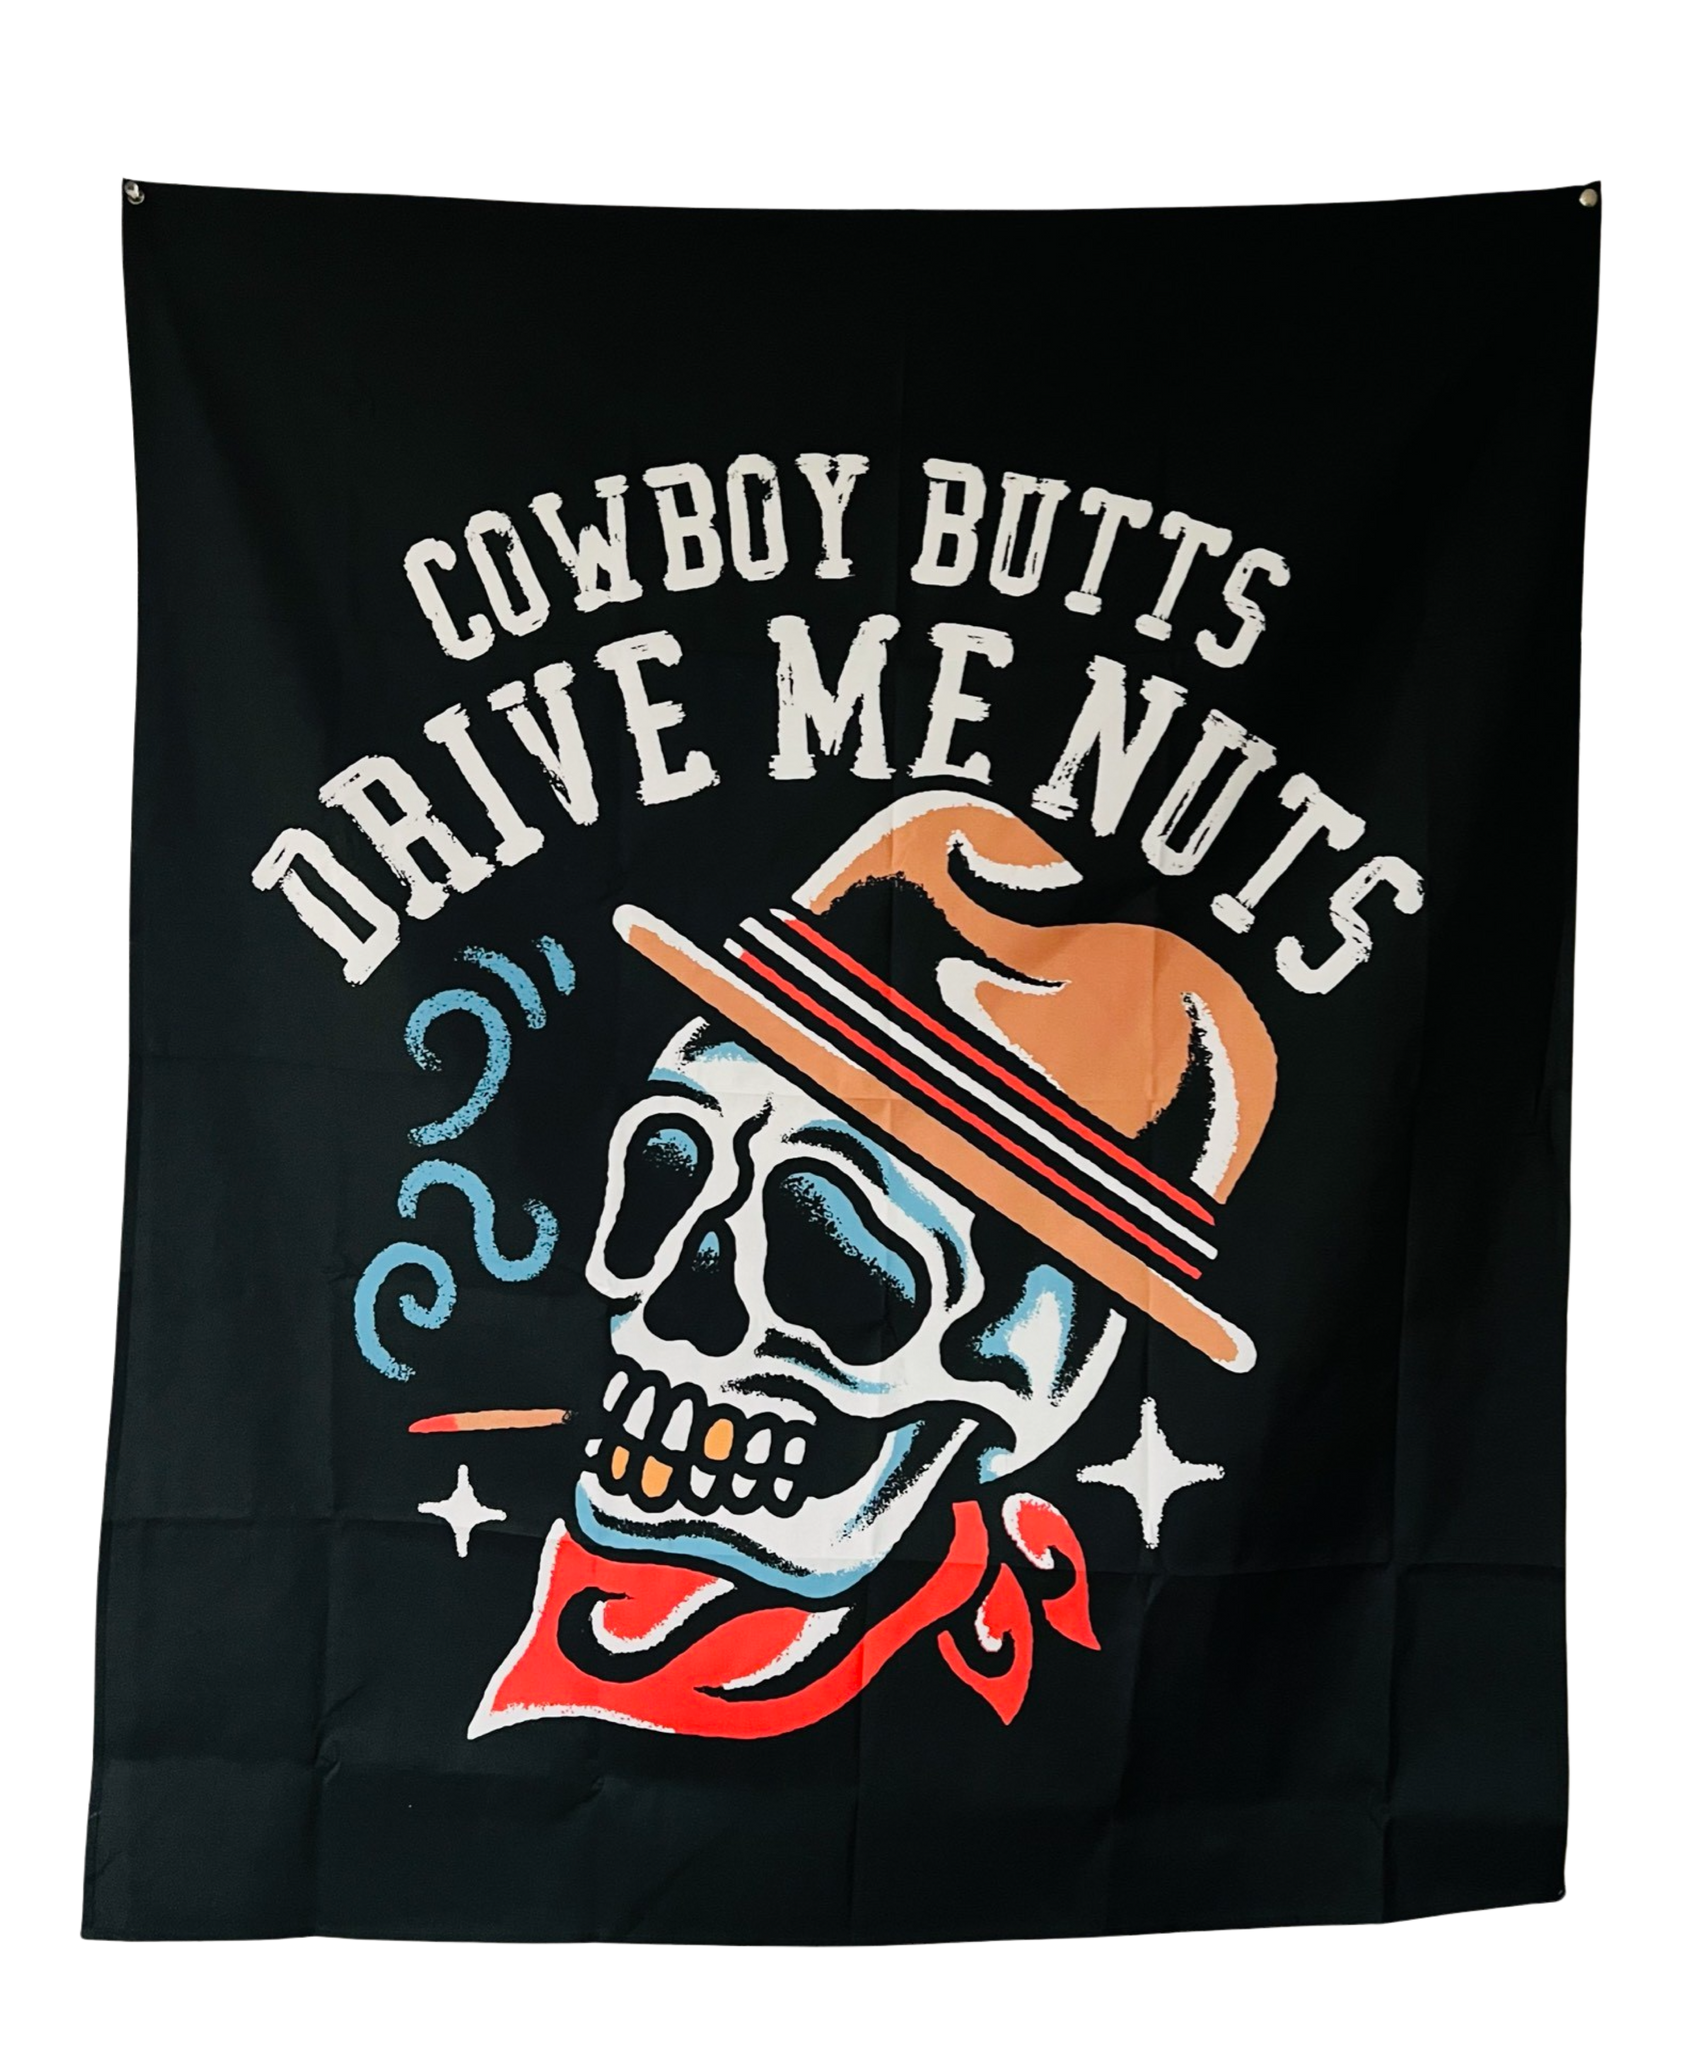 Cowboy Butts Tapestry - Awarewolf Apparel